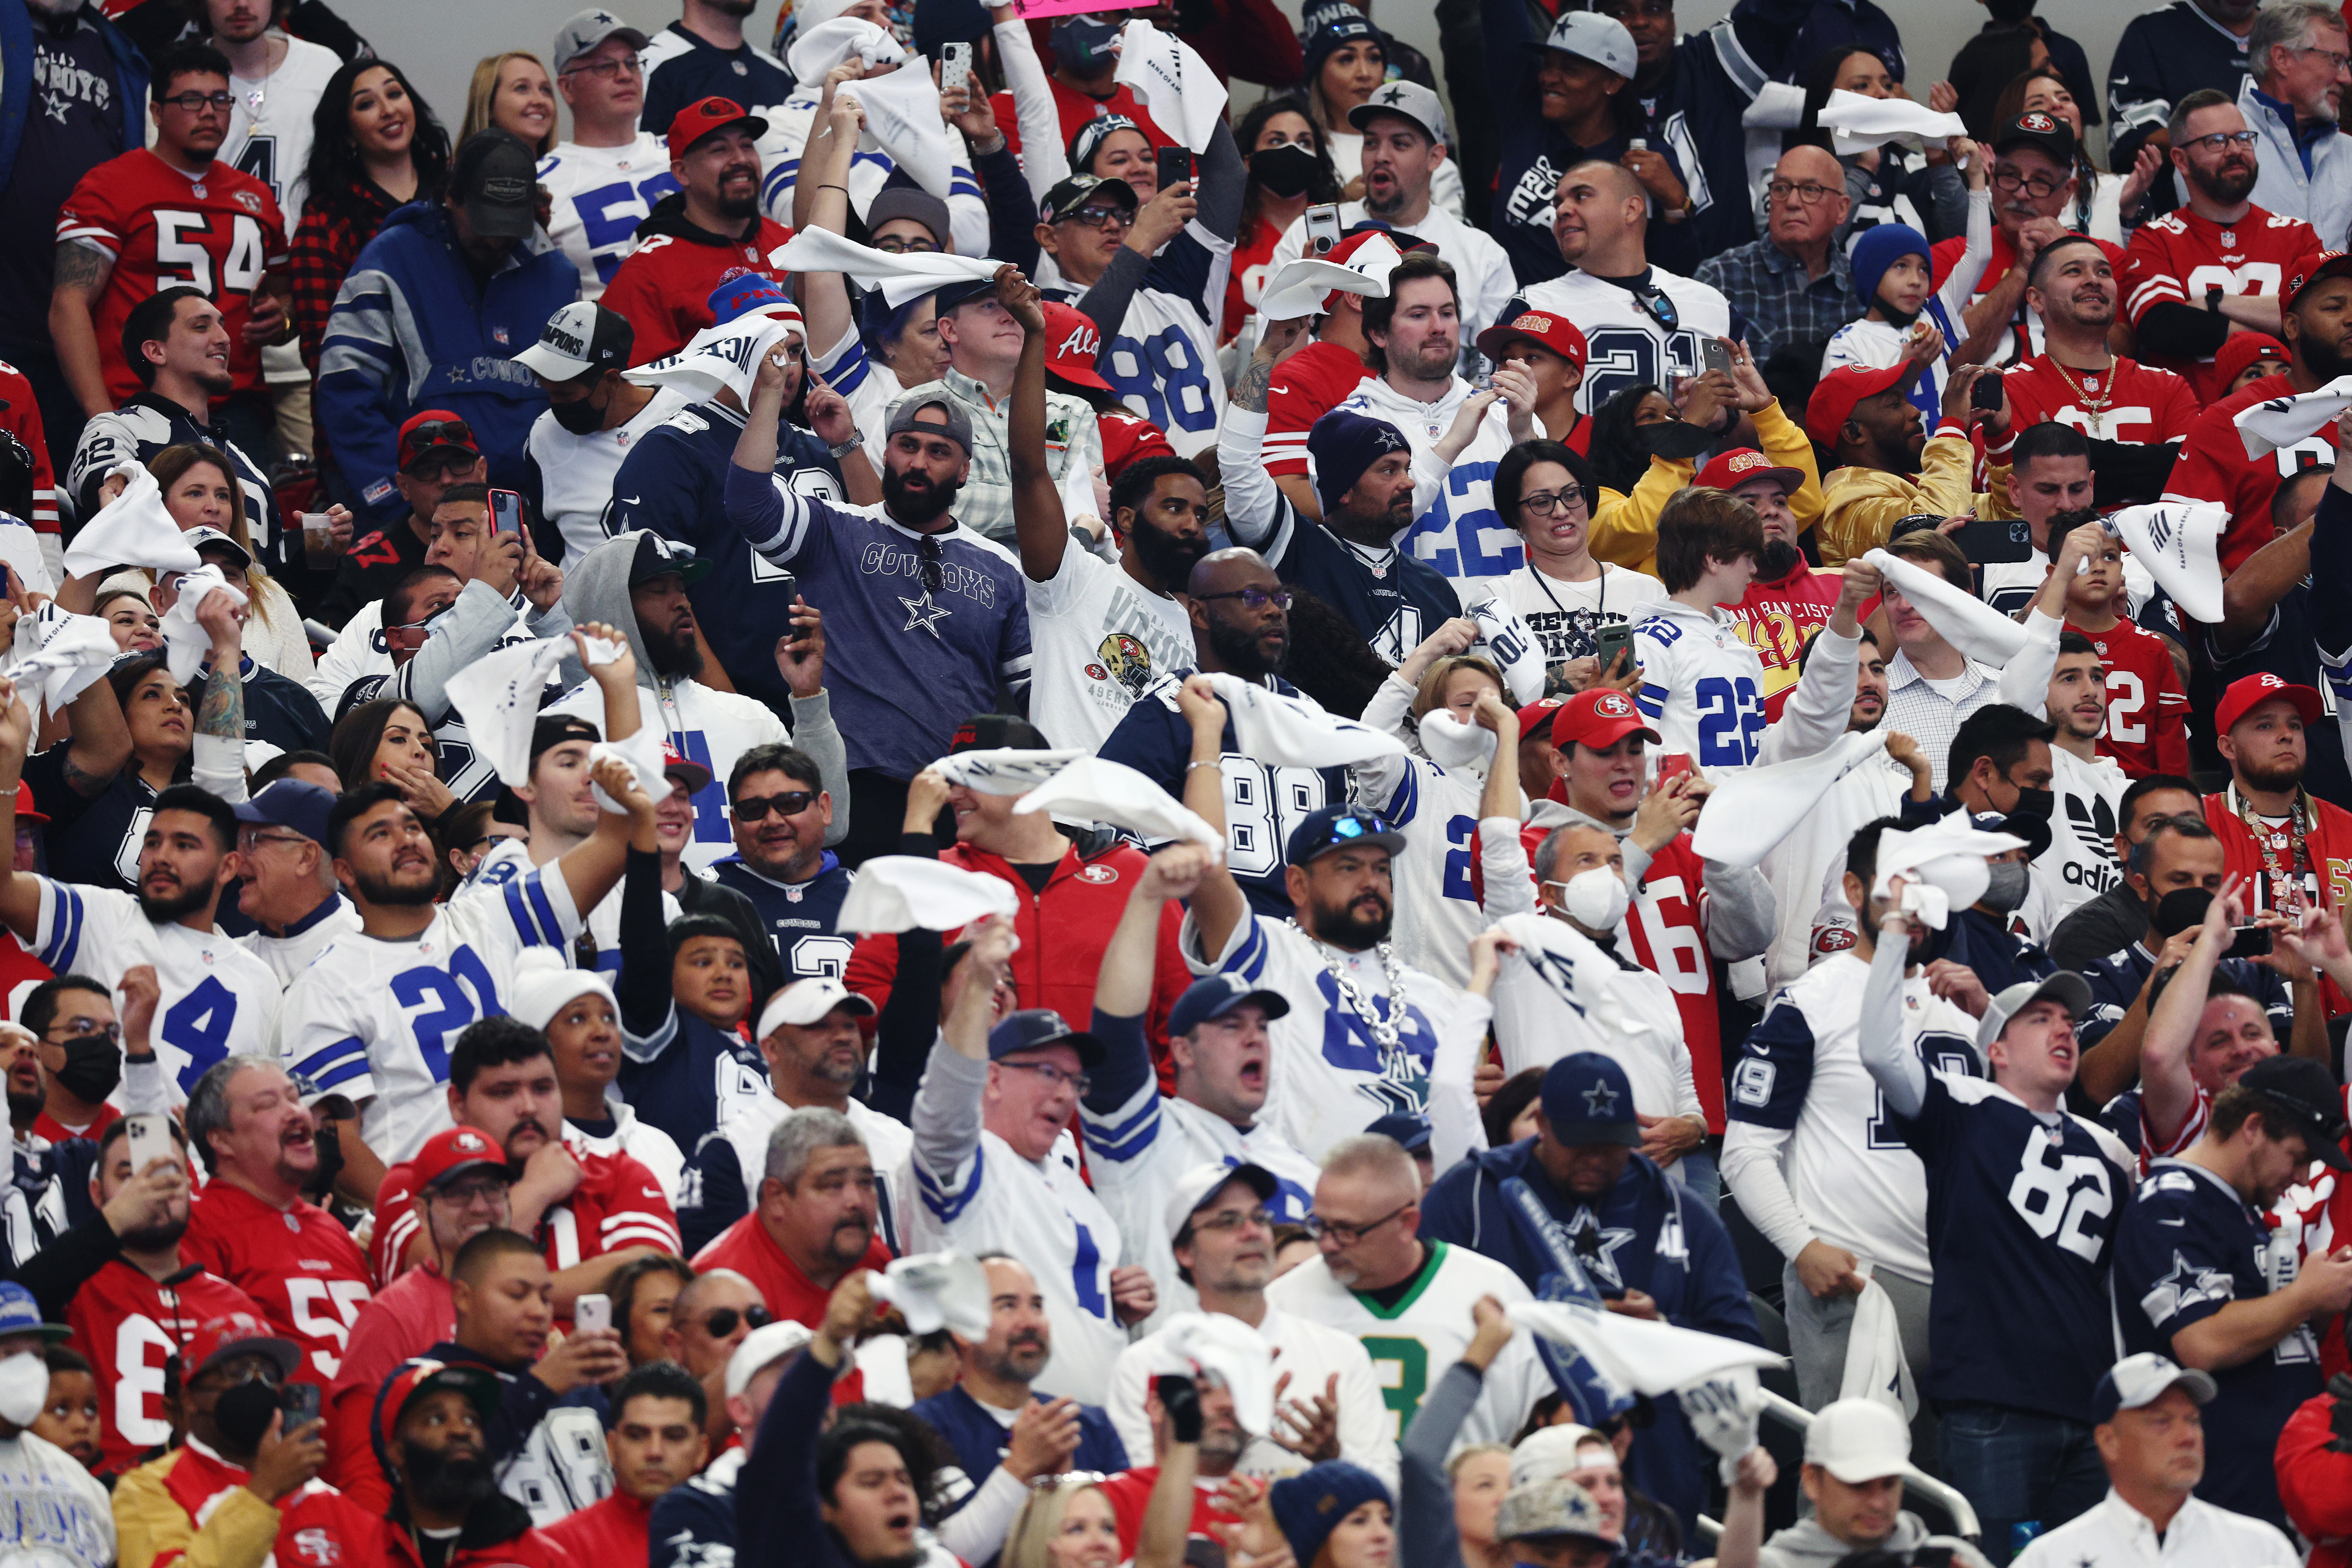 Fans Caught Throwing Objects at Refs on Video After Cowboys’ Loss to 49ers